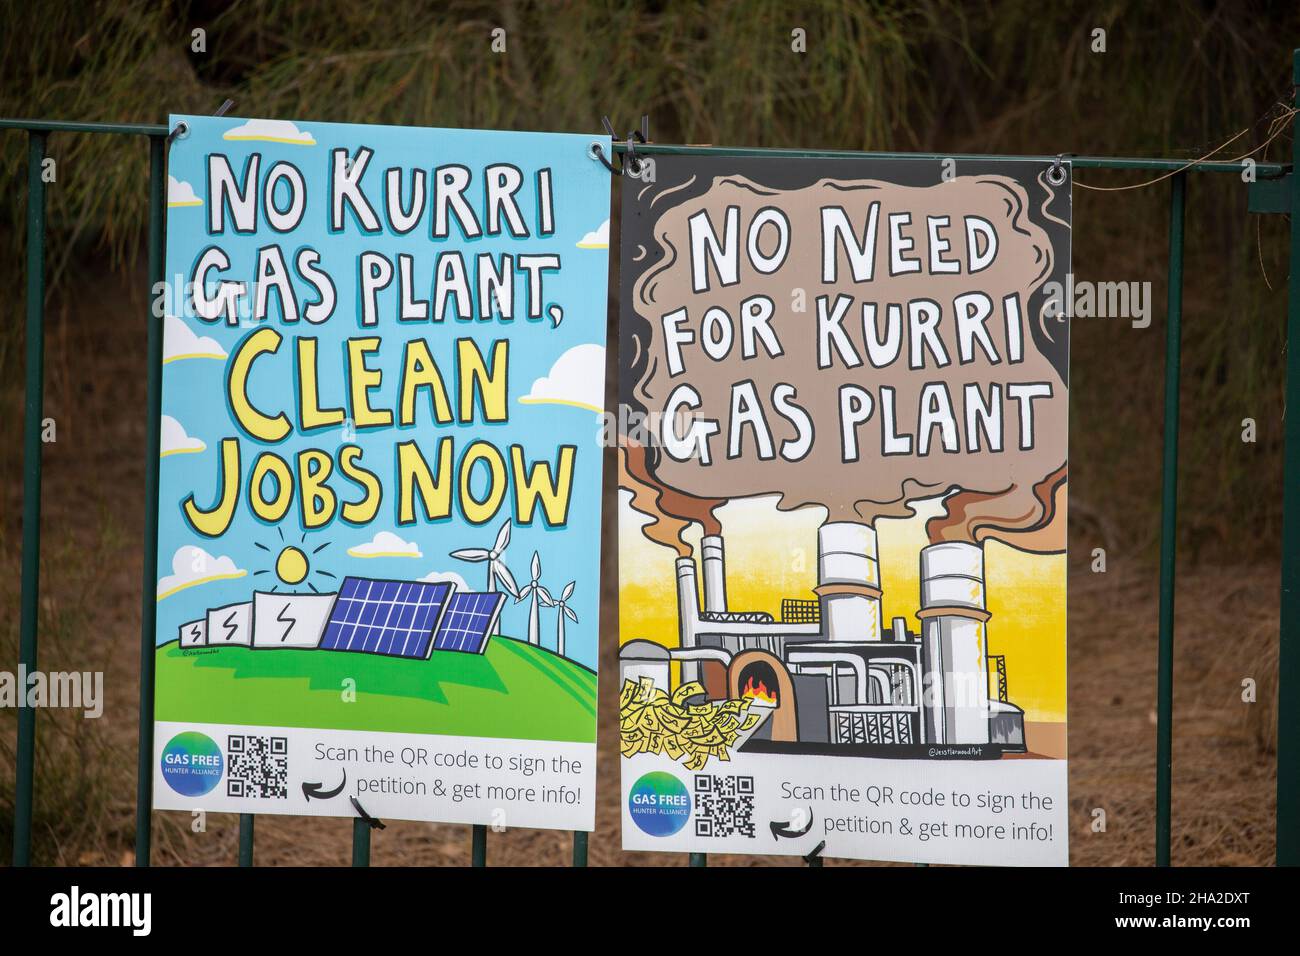 Protest banner against the kurri gas plant project in New South Wales,Australia Stock Photo